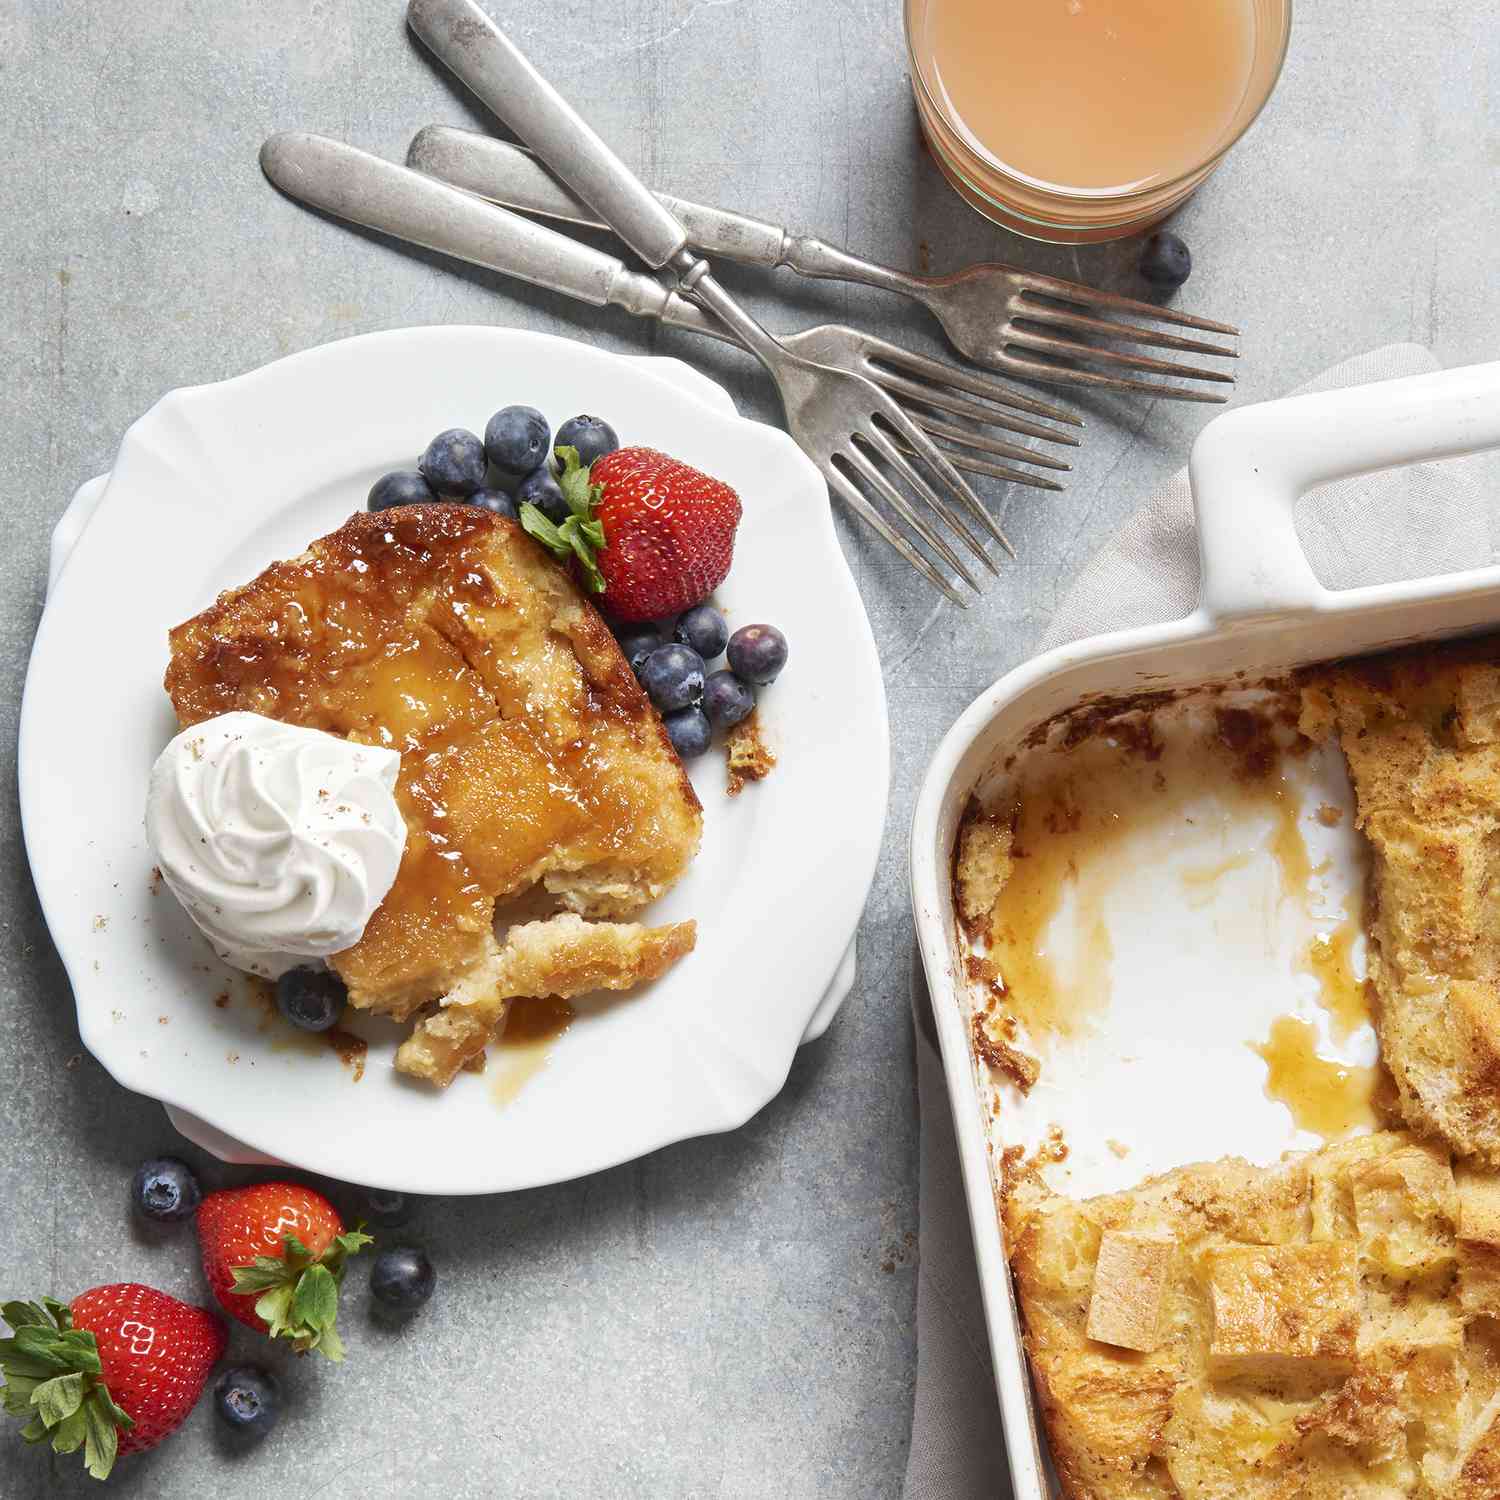 image of french toast with berries and whipped cream on a plate, and french toast in a baking dish, with forks and a glass of juice on the side